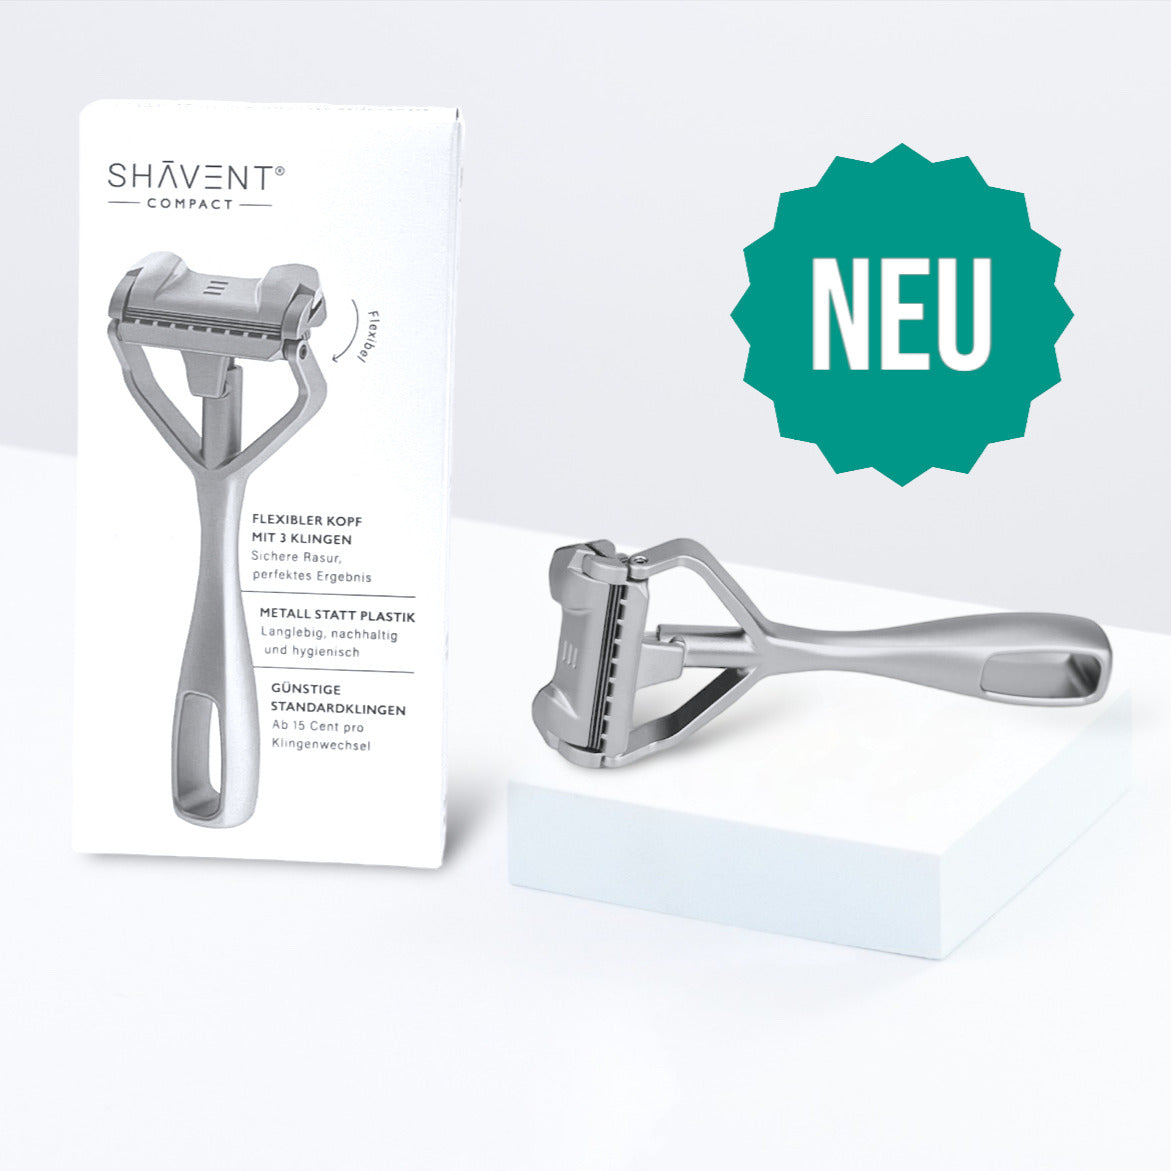 Travel size: SHAVENT Compact, the handy metal shaver for travel / shower